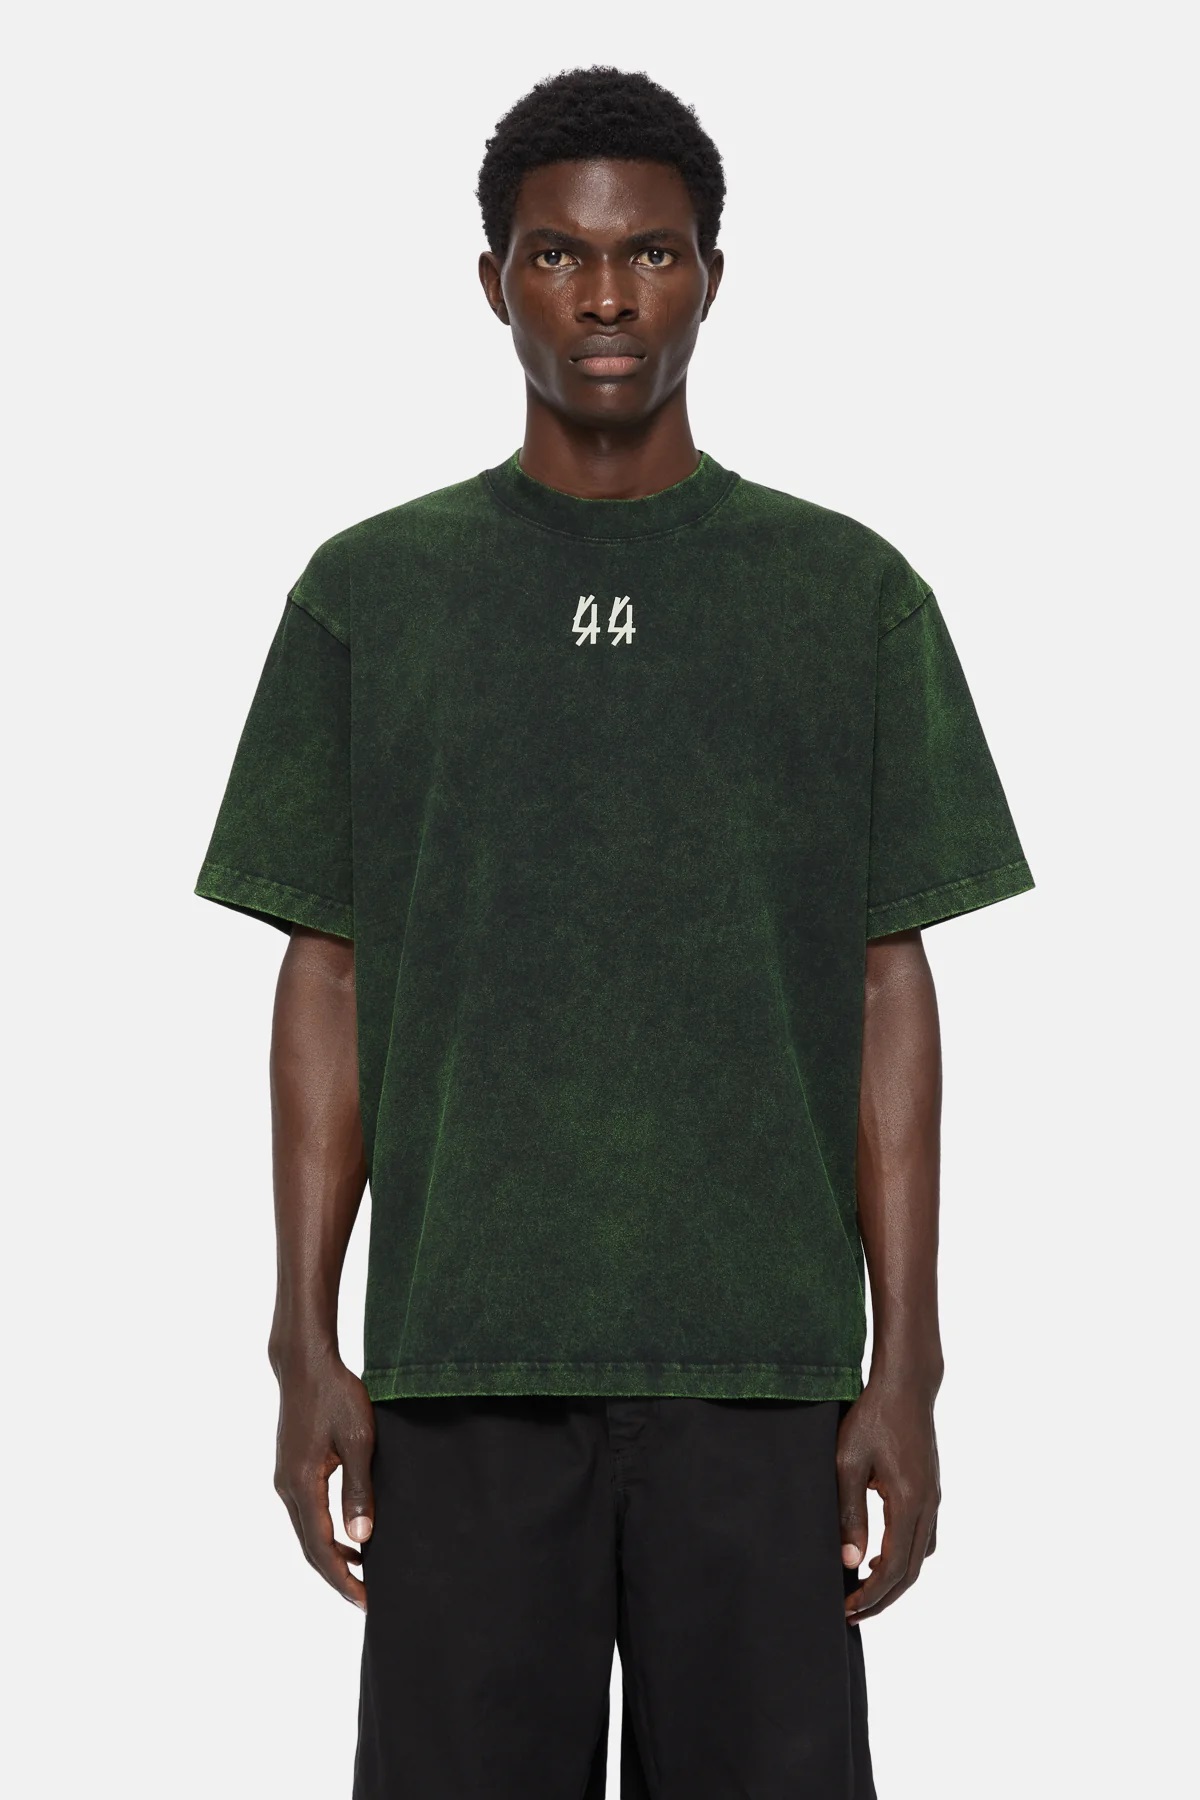 44 LABEL GROUP Overdied Solar Tee in Green S